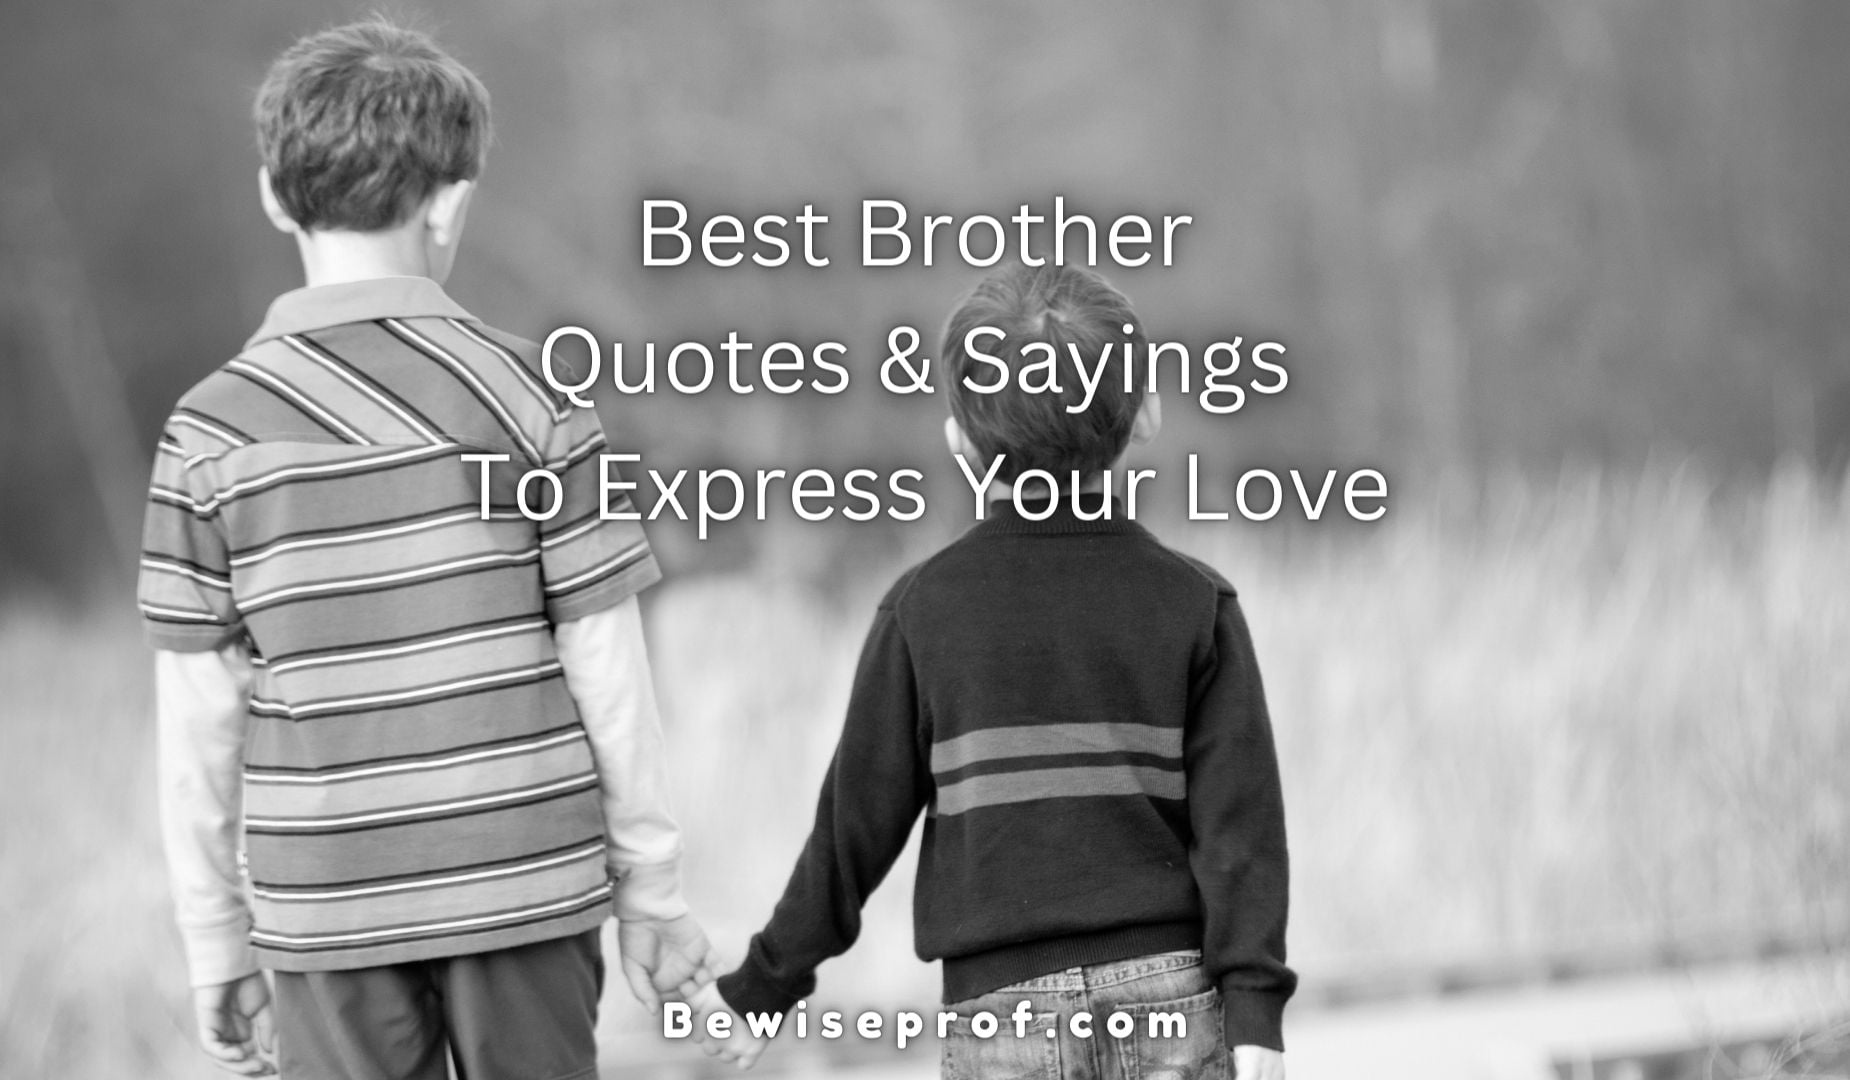 Best Brother Quotes & Sayings To Express Your Love